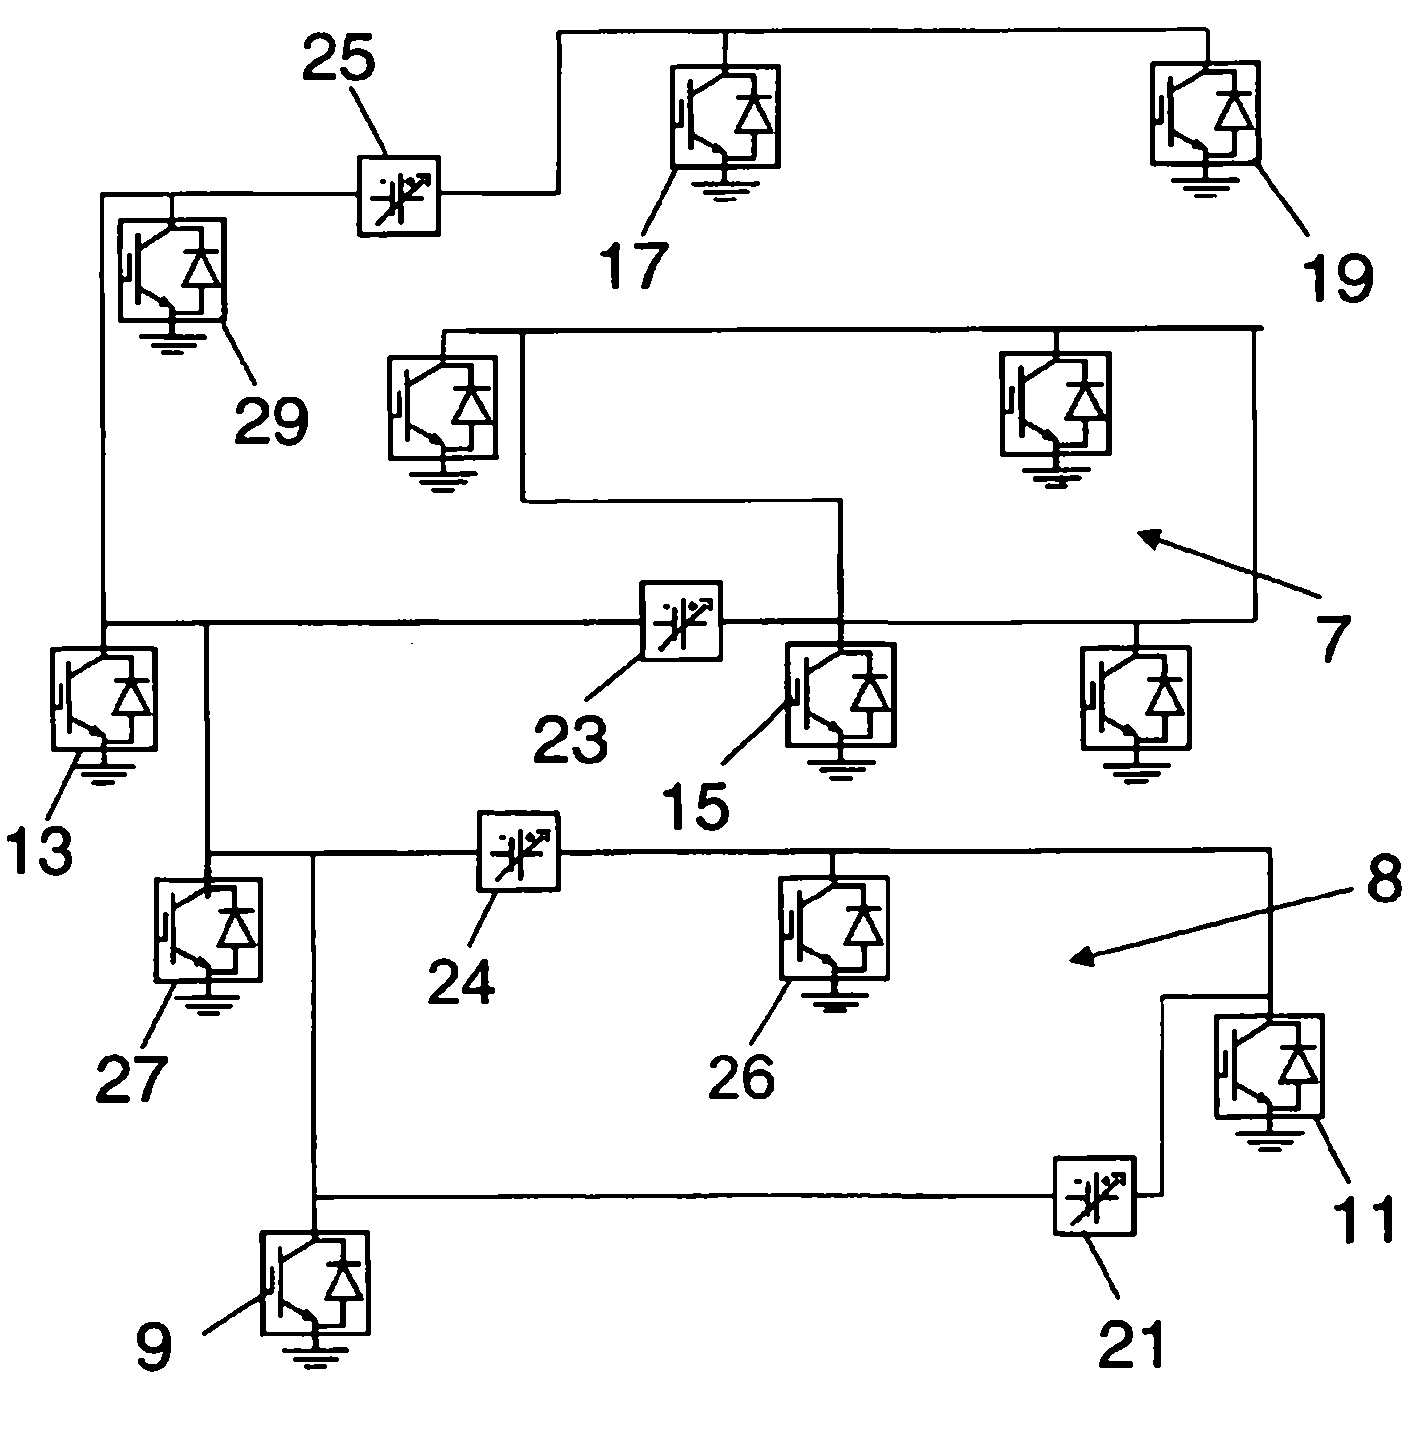 DC voltage compensation in a multi-terminal hvdc power transmission network